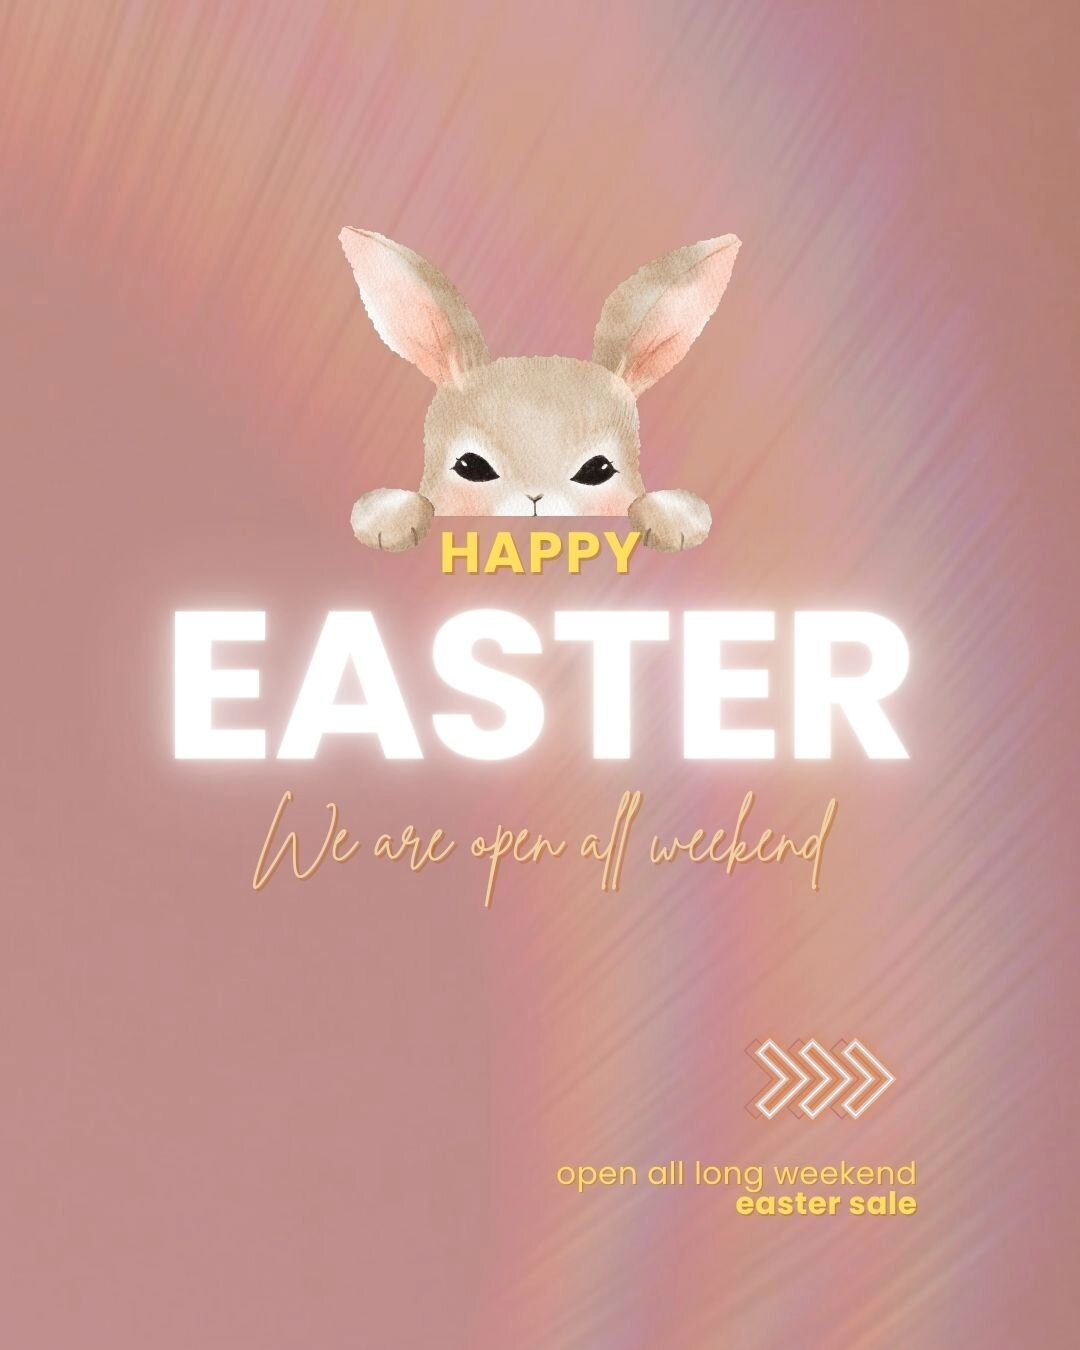 The Easter Bunny came early 🐰🎁 Our Studio is open all weekend. 

And... we have a Sale on a 5 Pack.  Normally $225 this weekend it's only $150 💫

https://bit.ly/5-ClassPack to purchase or link in bio 🐣✨️

We can't wait to see you over the weekend